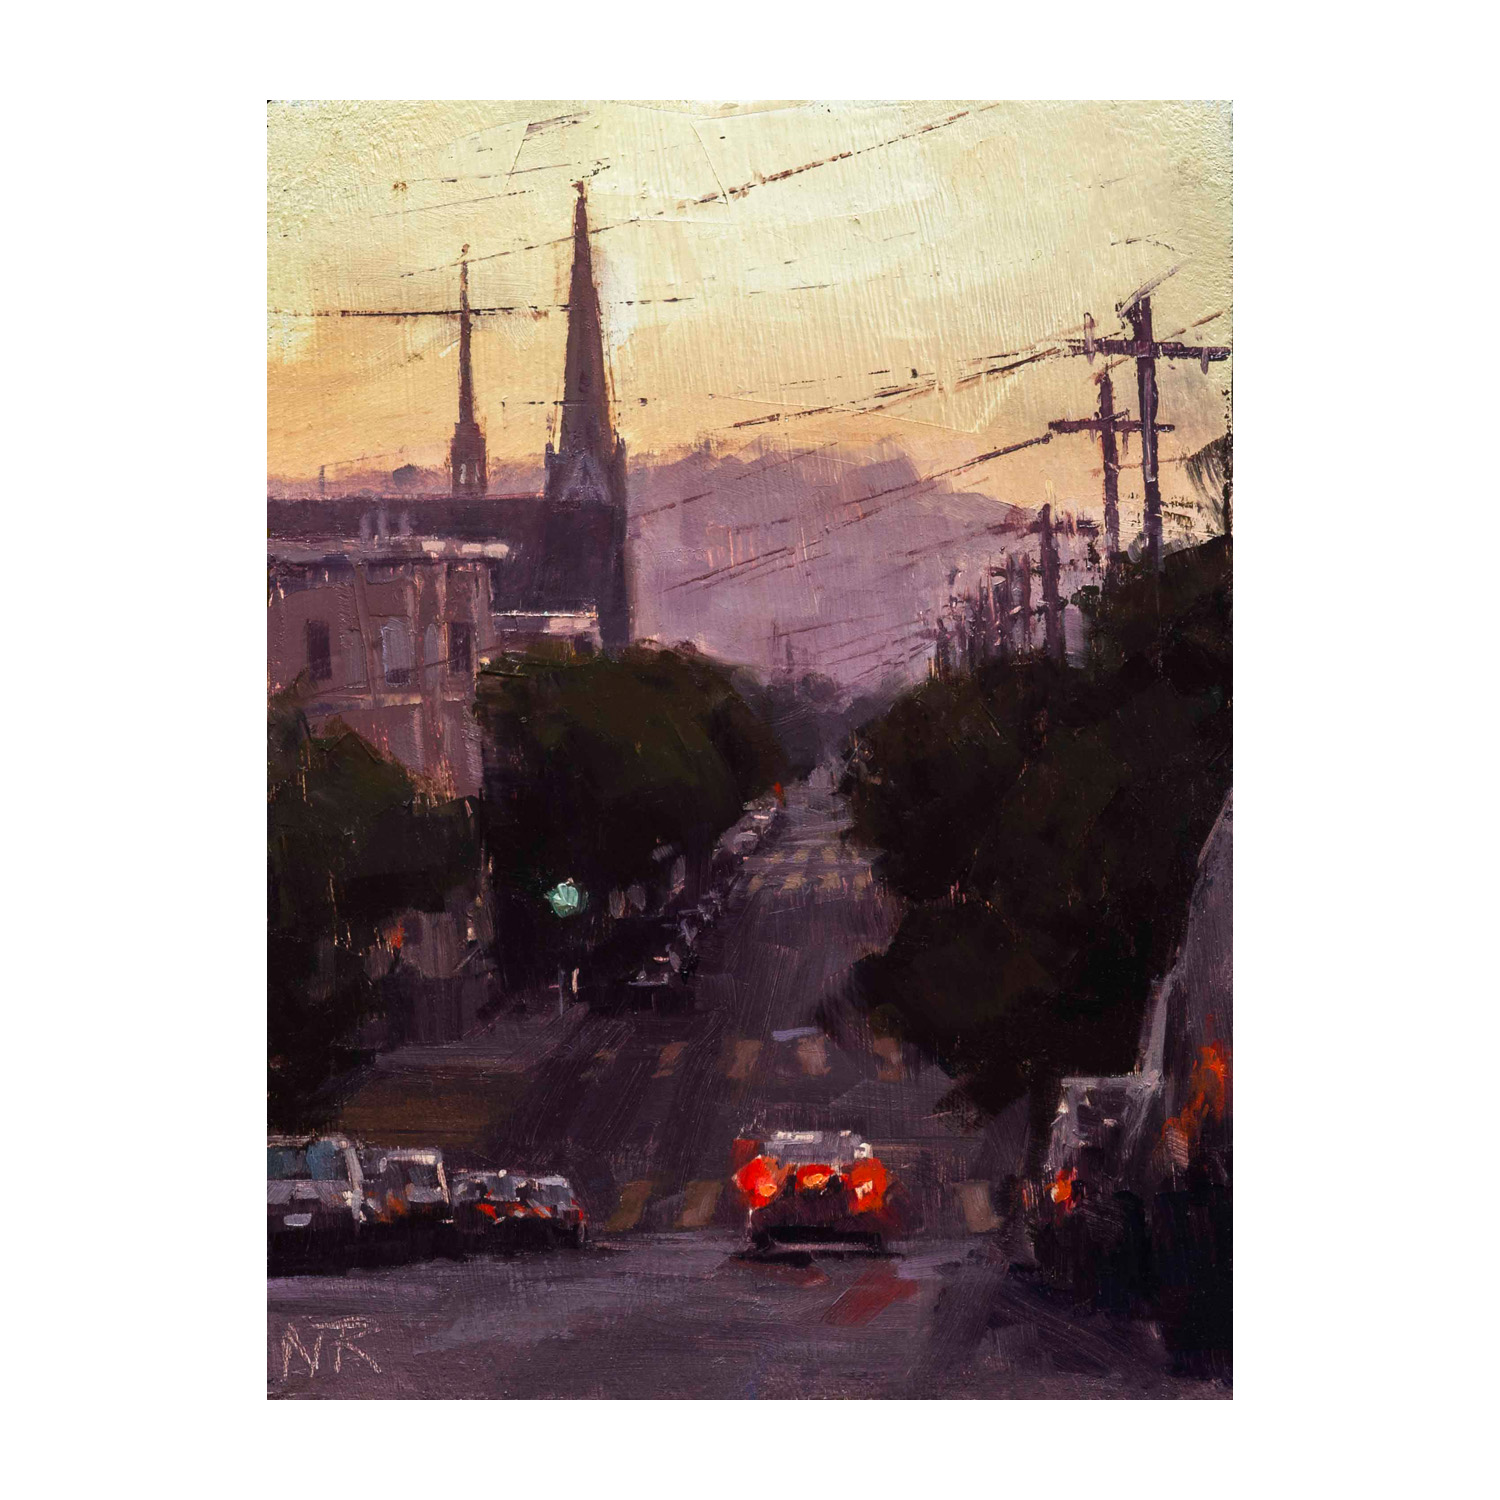 Dawn in the Mission